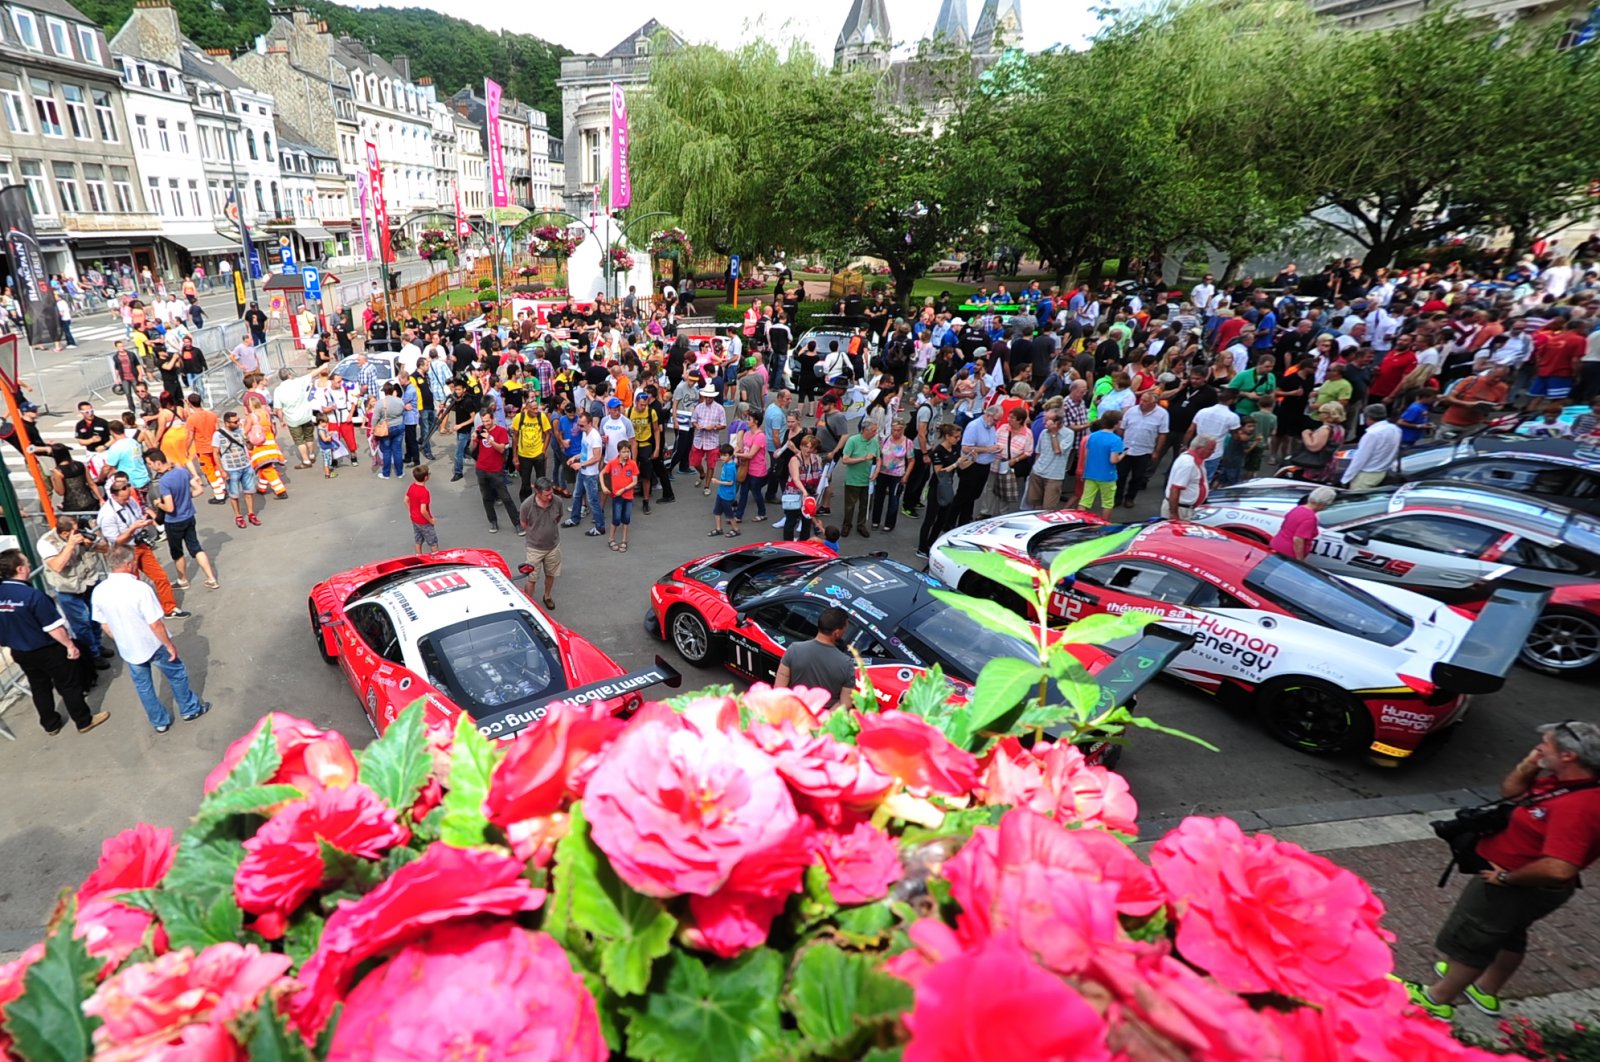 Impressive crowd greets parade in the Spa town centre